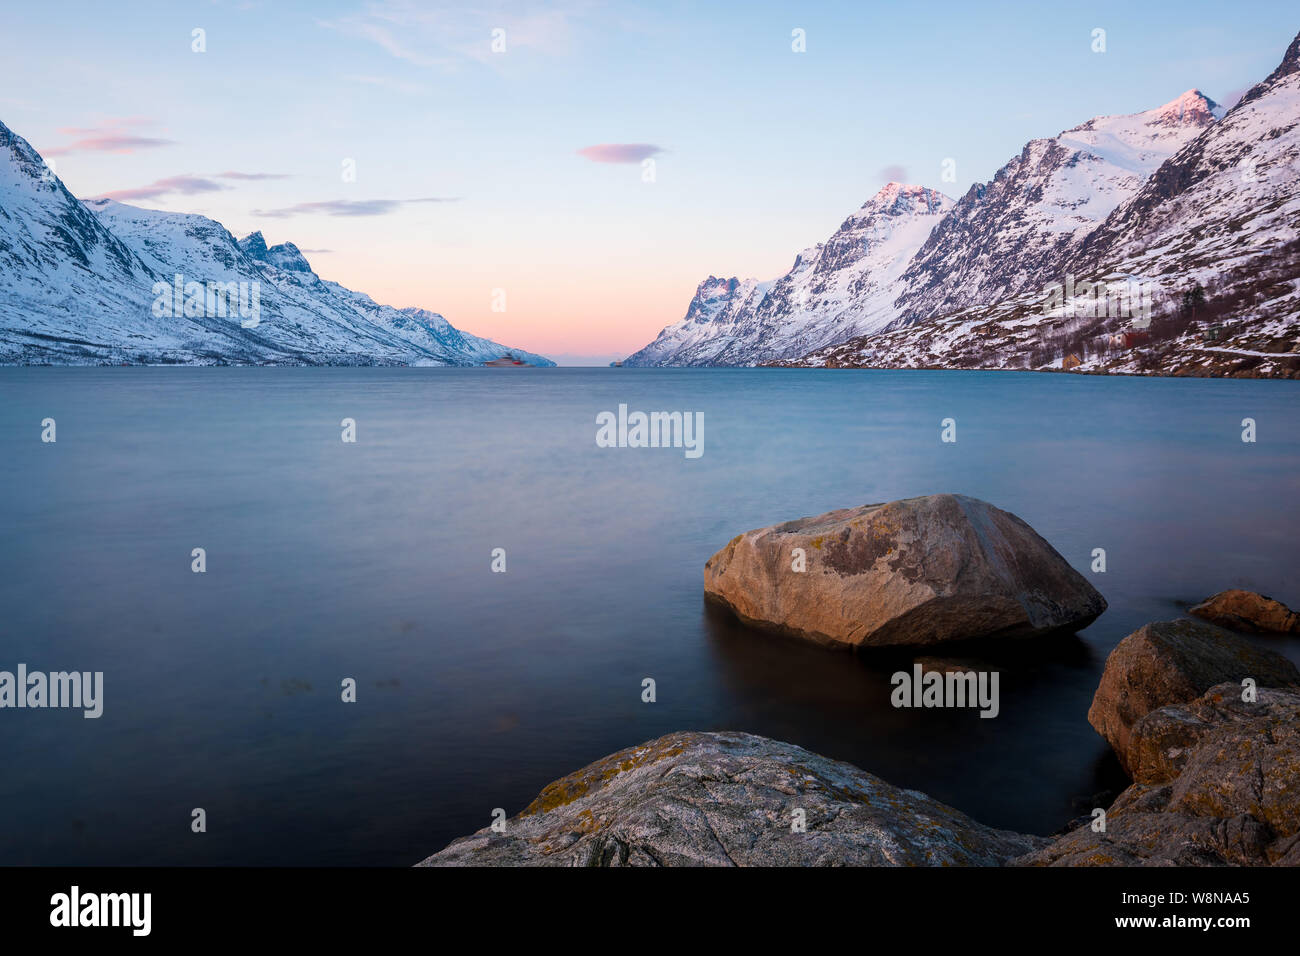 Ersfjord at sunset in winter with snowy mountains and rocks in foreground, Norway Stock Photo